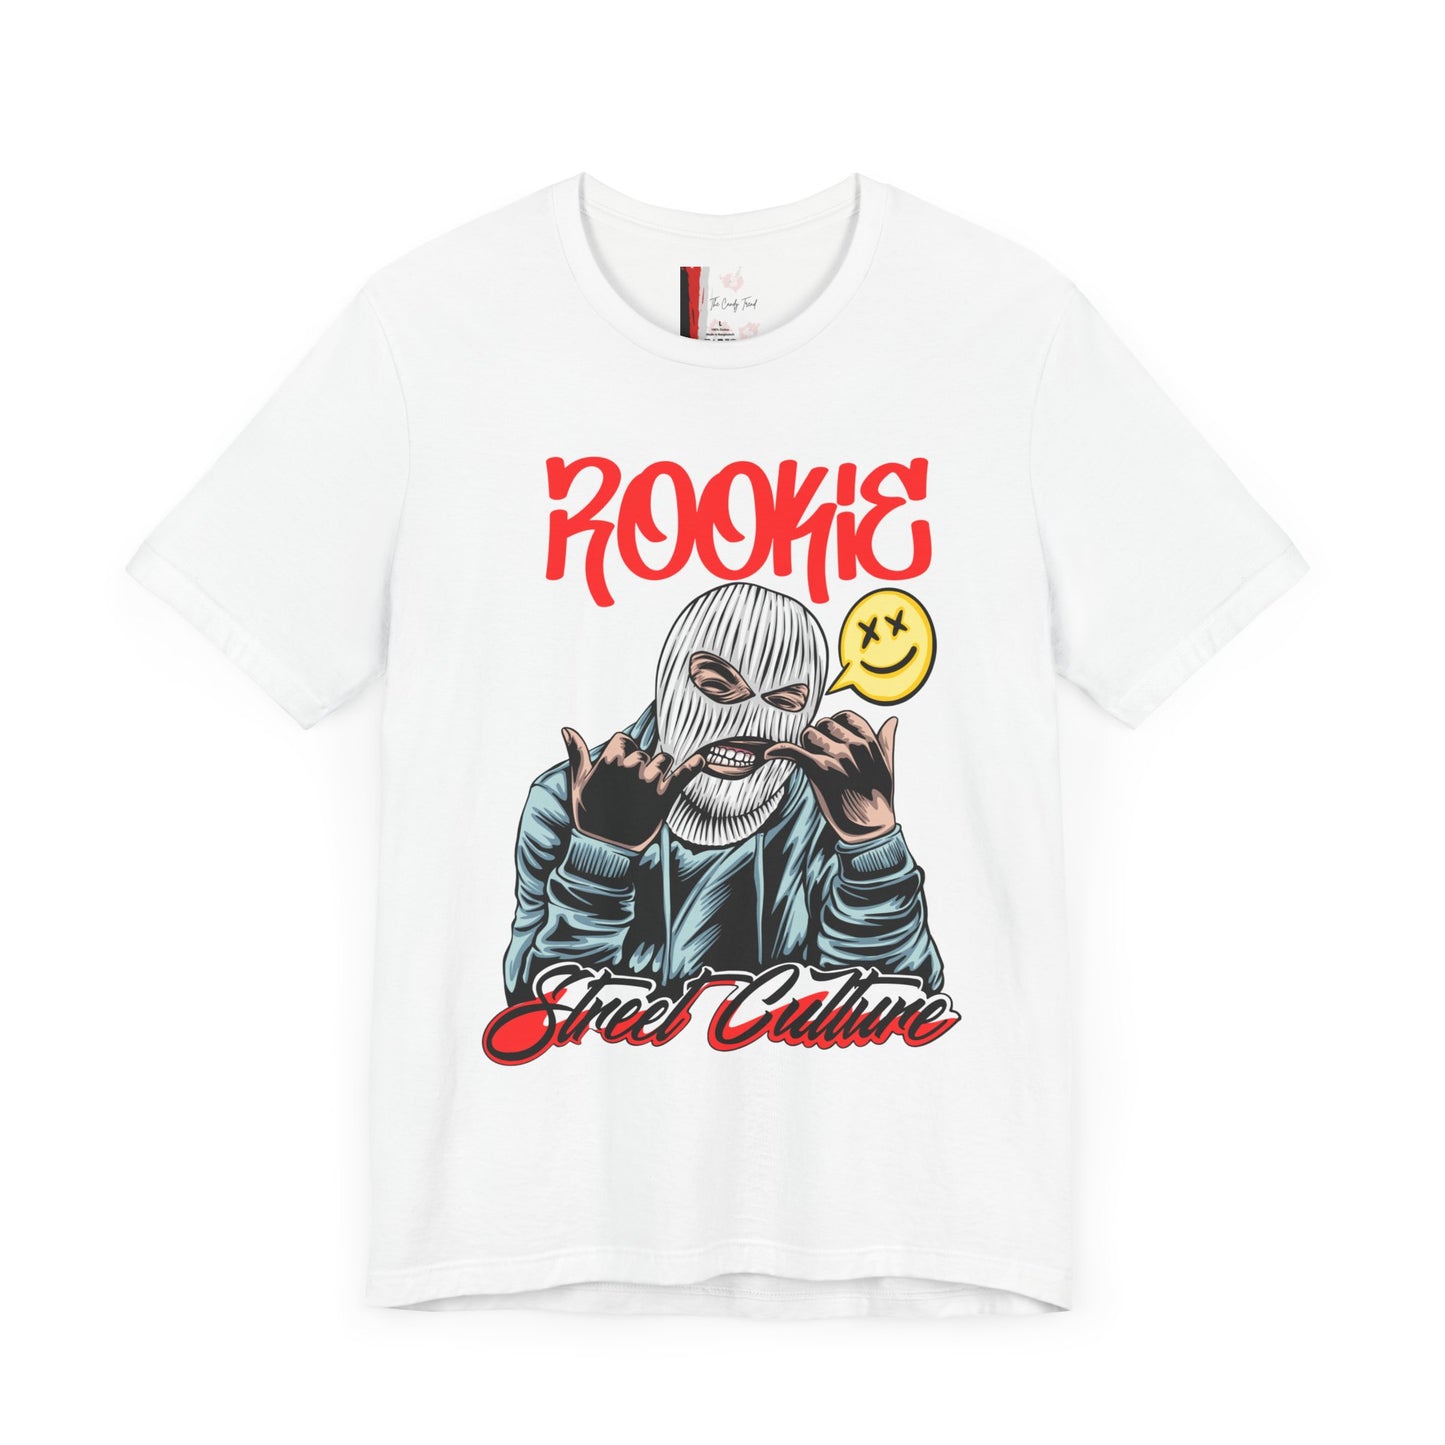 STREET CULTURE GRAPHIC T-SHIRT